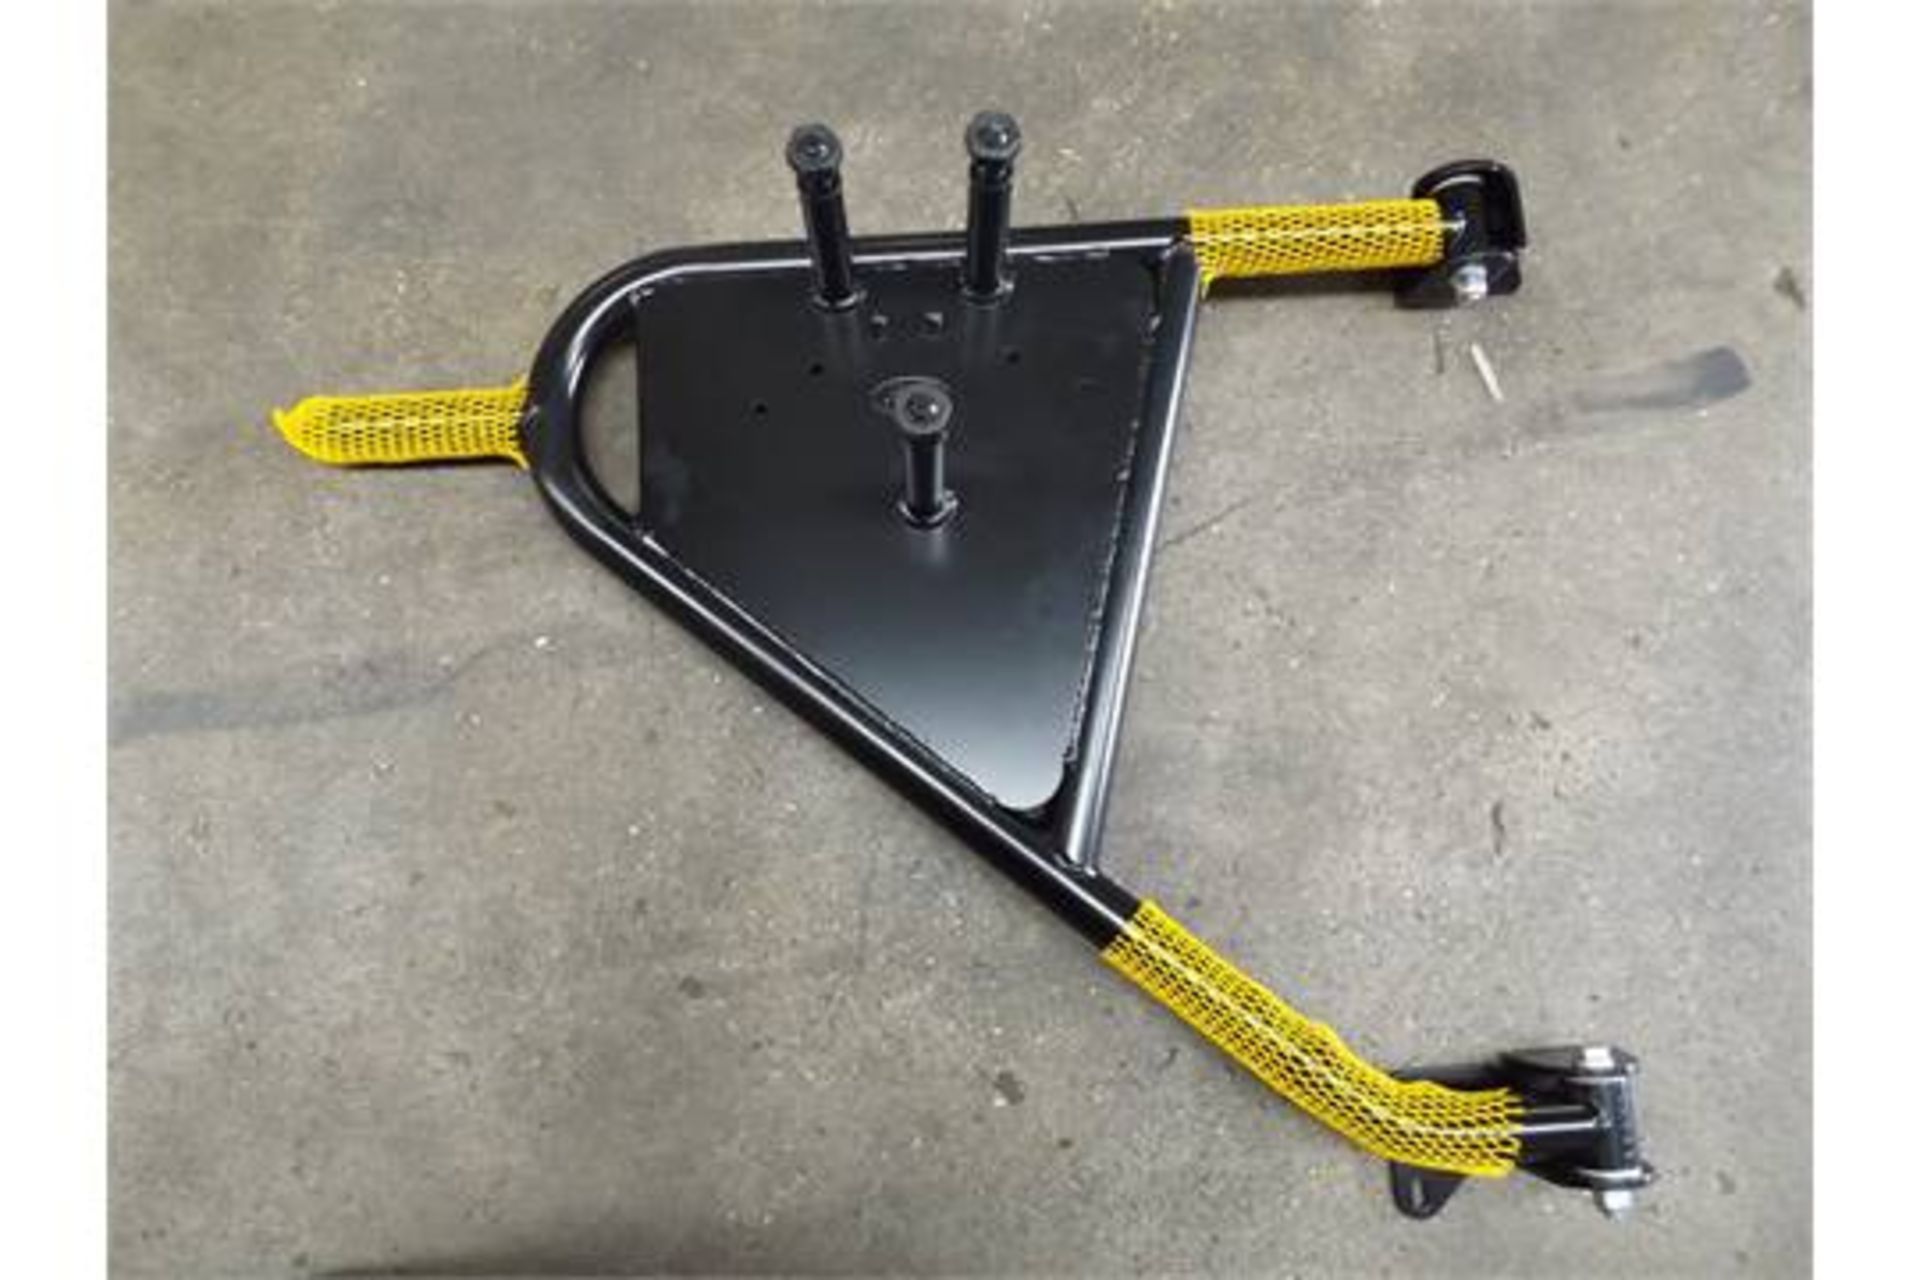 30 x Land Rover Defender Swing Out Spare Wheel Carrier Kits P/No VPLDR0129 - Image 3 of 11